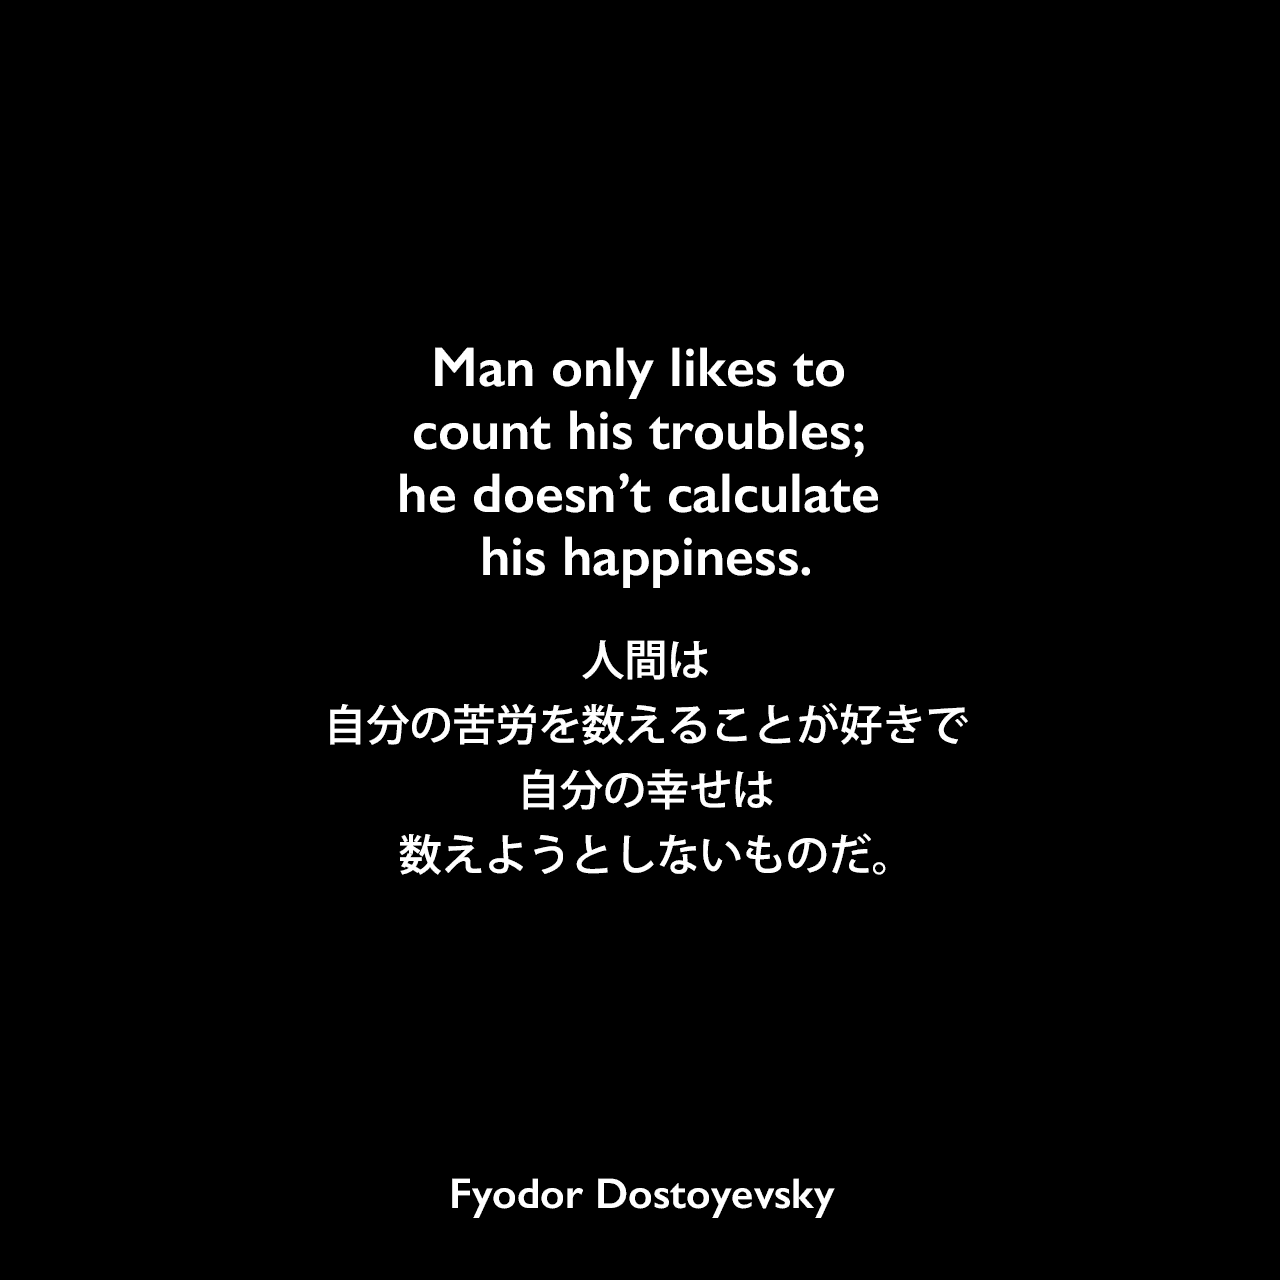 Man only likes to count his troubles; he doesn’t calculate his happiness.人間は、自分の苦労を数えることが好きで、自分の幸せは数えようとしないものだ。Fyodor Dostoyevsky